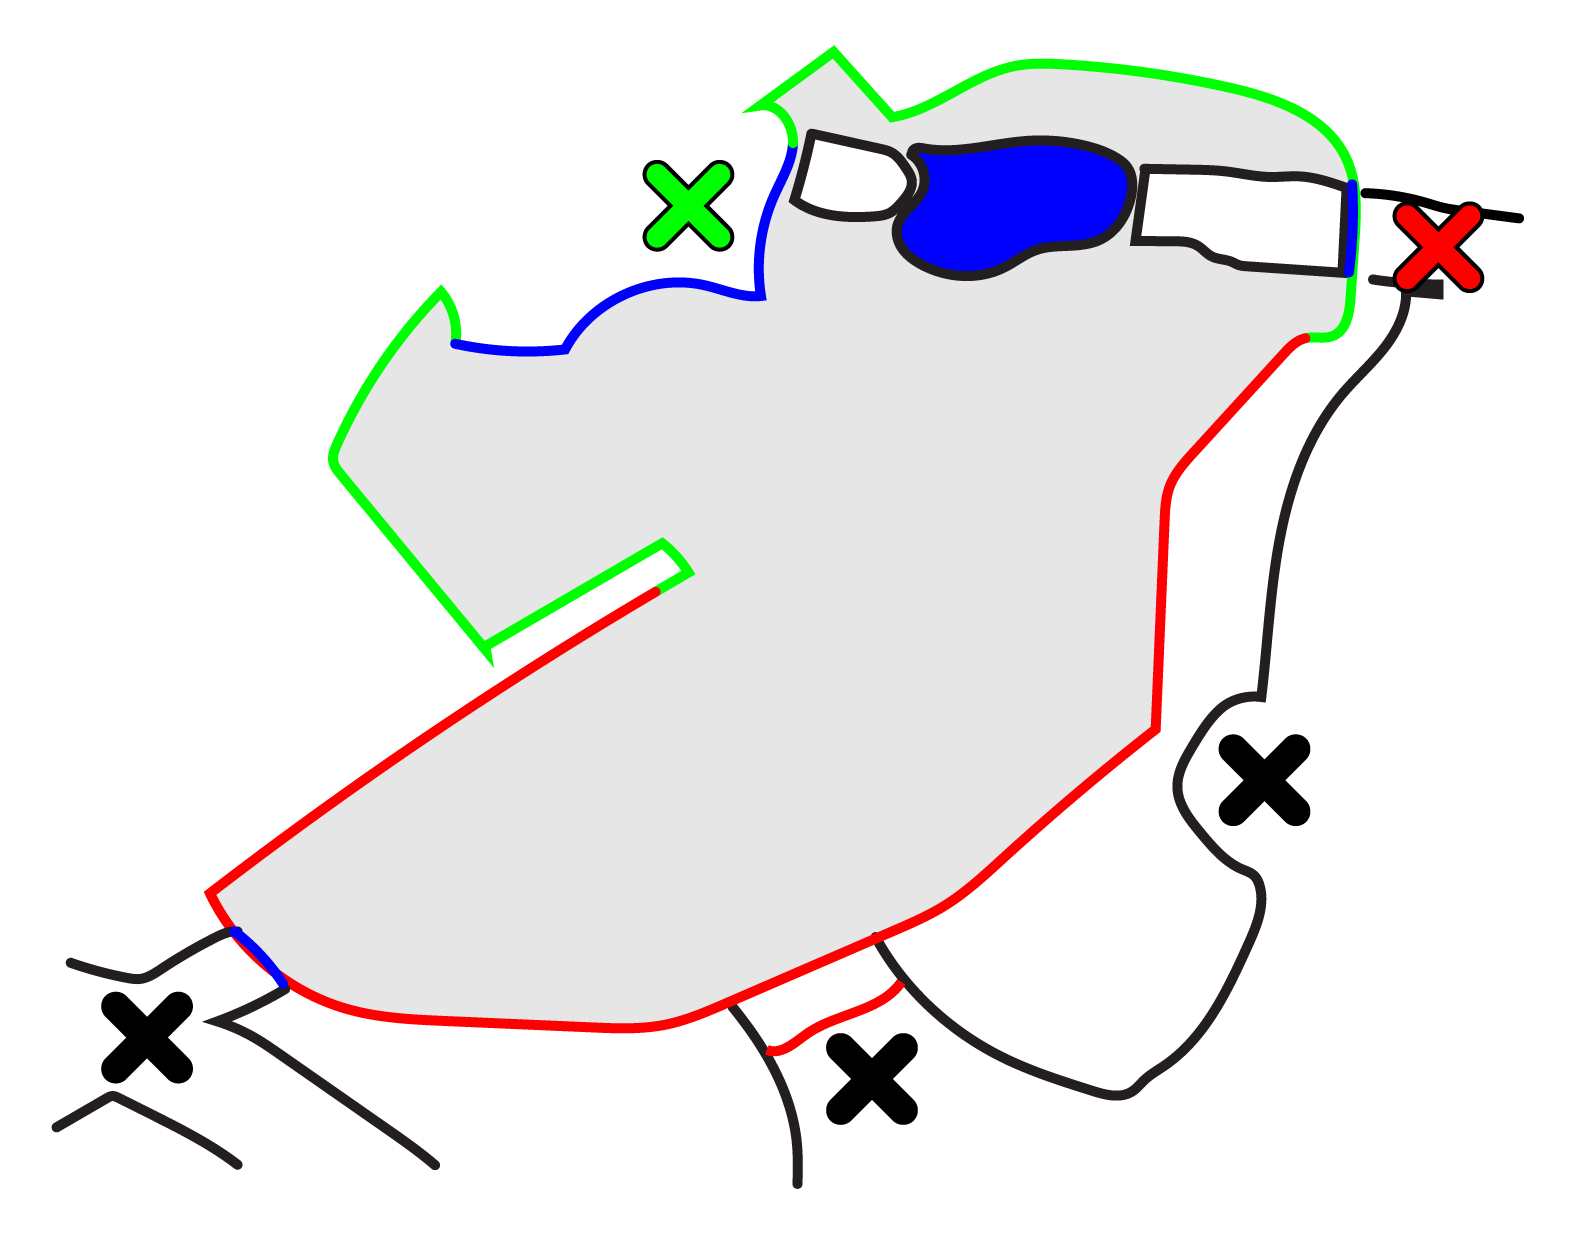 Figure 1: A schematic map of the tiger enclosure. Green lines indicate solid walls, red lines chain-link fences and blue lines floor-to-ceiling double glass walls. X marks viewing spots, the green X being the main viewing area and the red X the other glass wall. Filled out with blue is a pool.